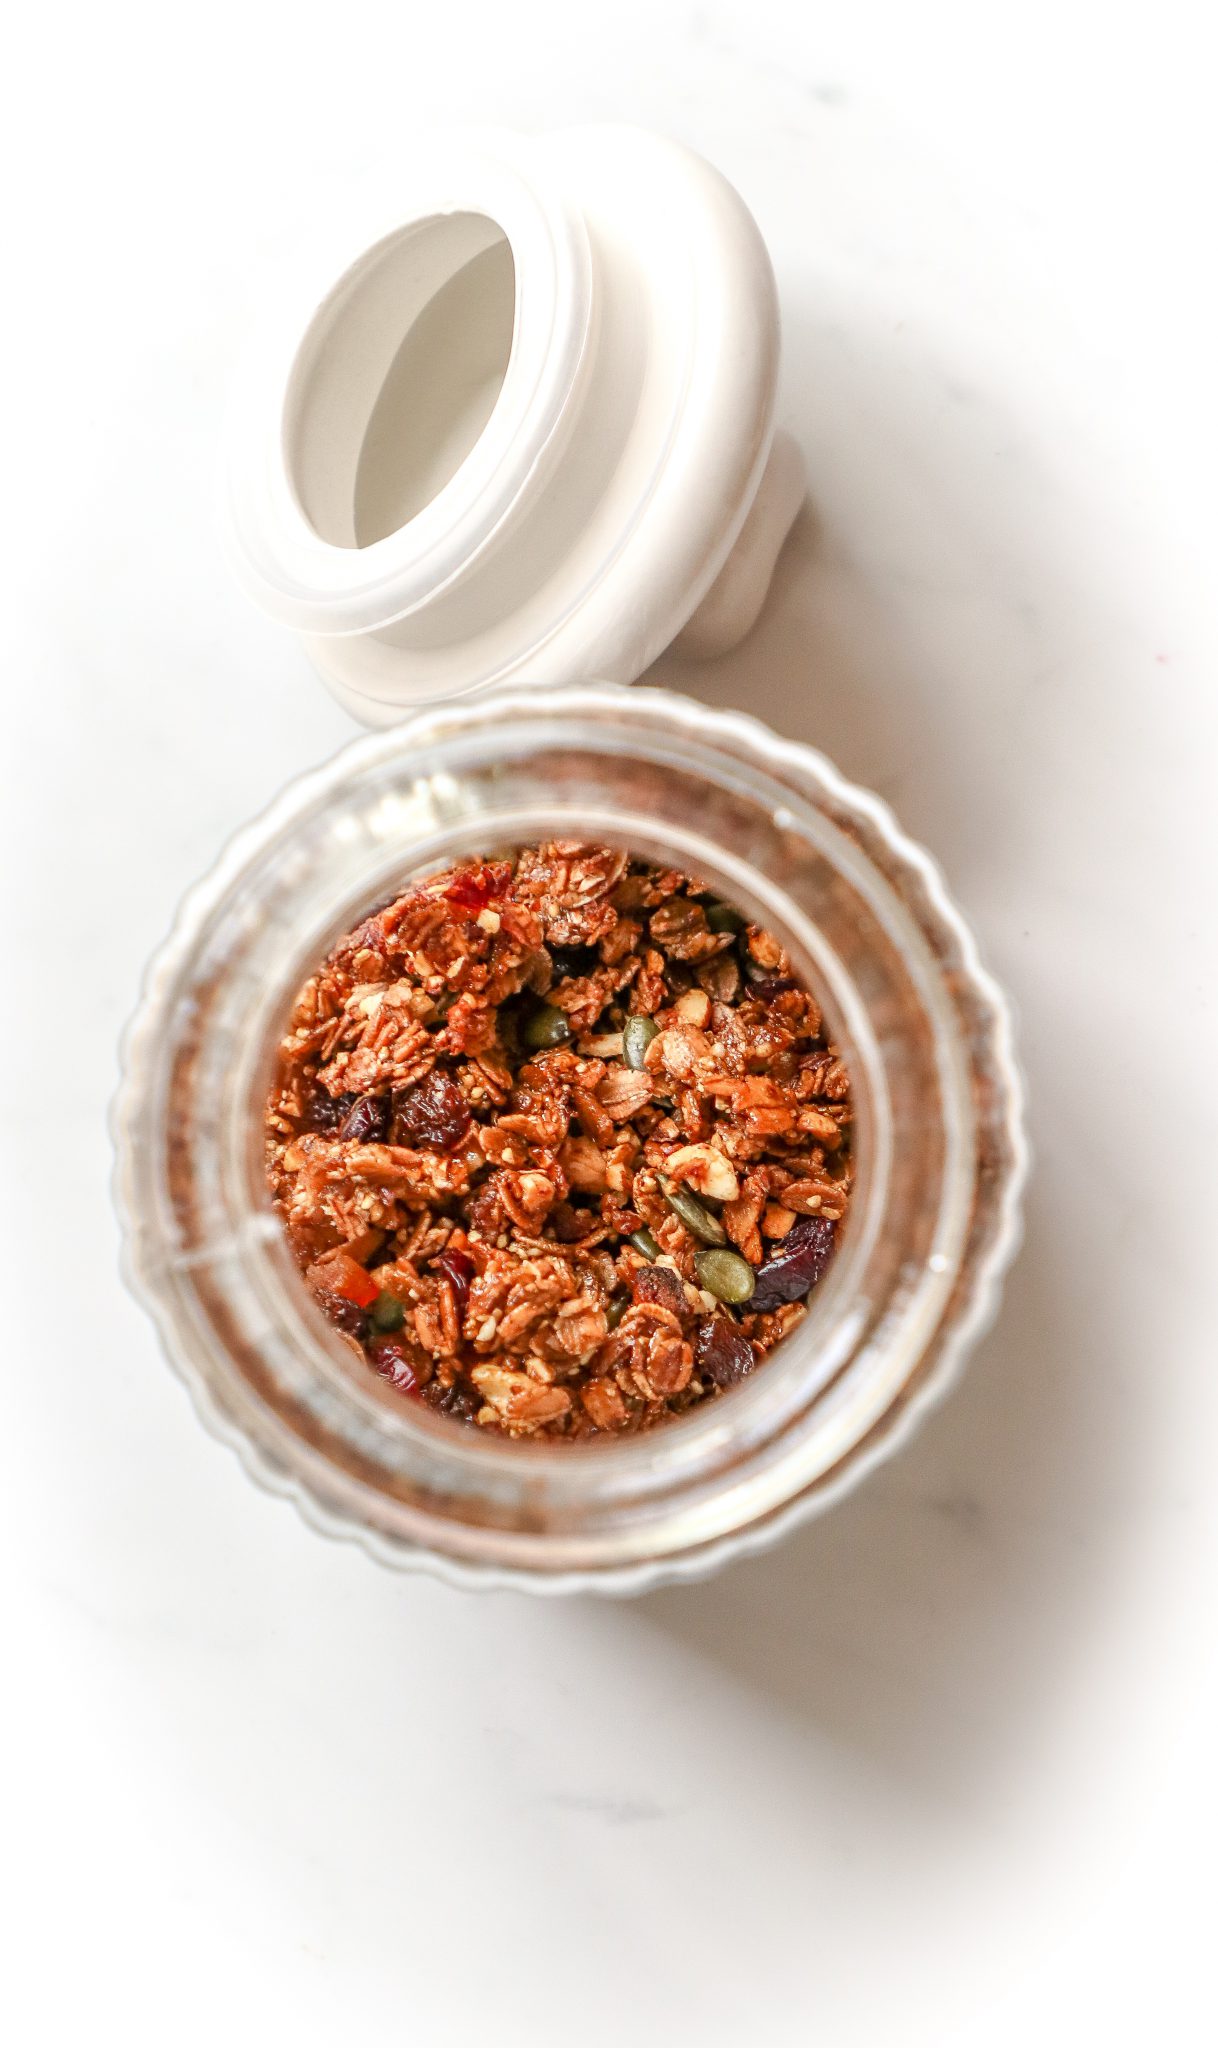 Homemade crunchy granola with nuts